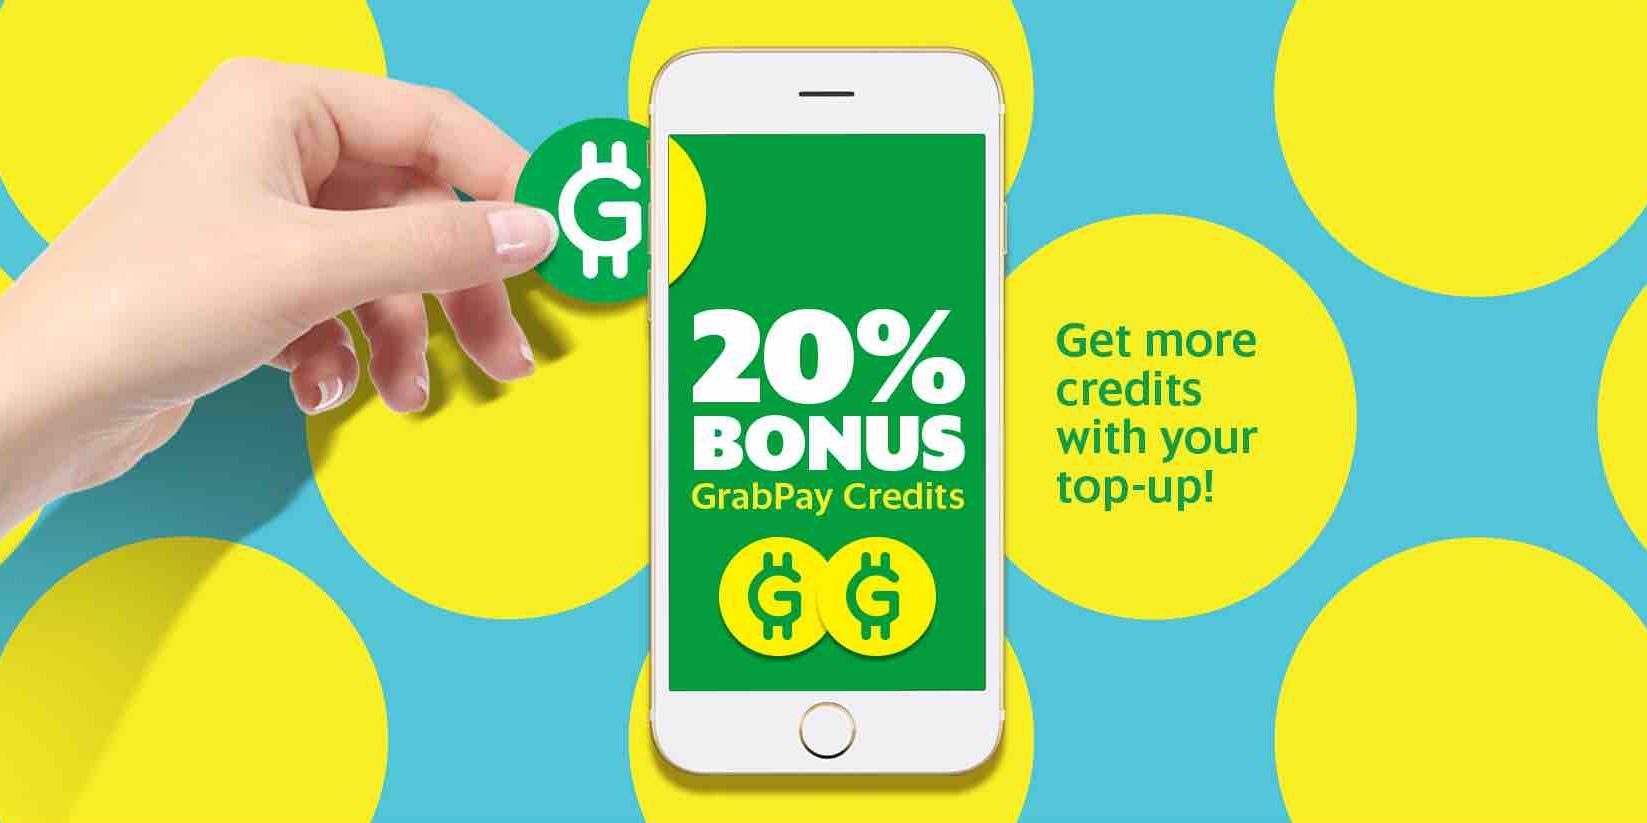 Grab Singapore Top-Up GrabPay Credits & Get 20% More 1 Day Only Promotion 23 May 2017